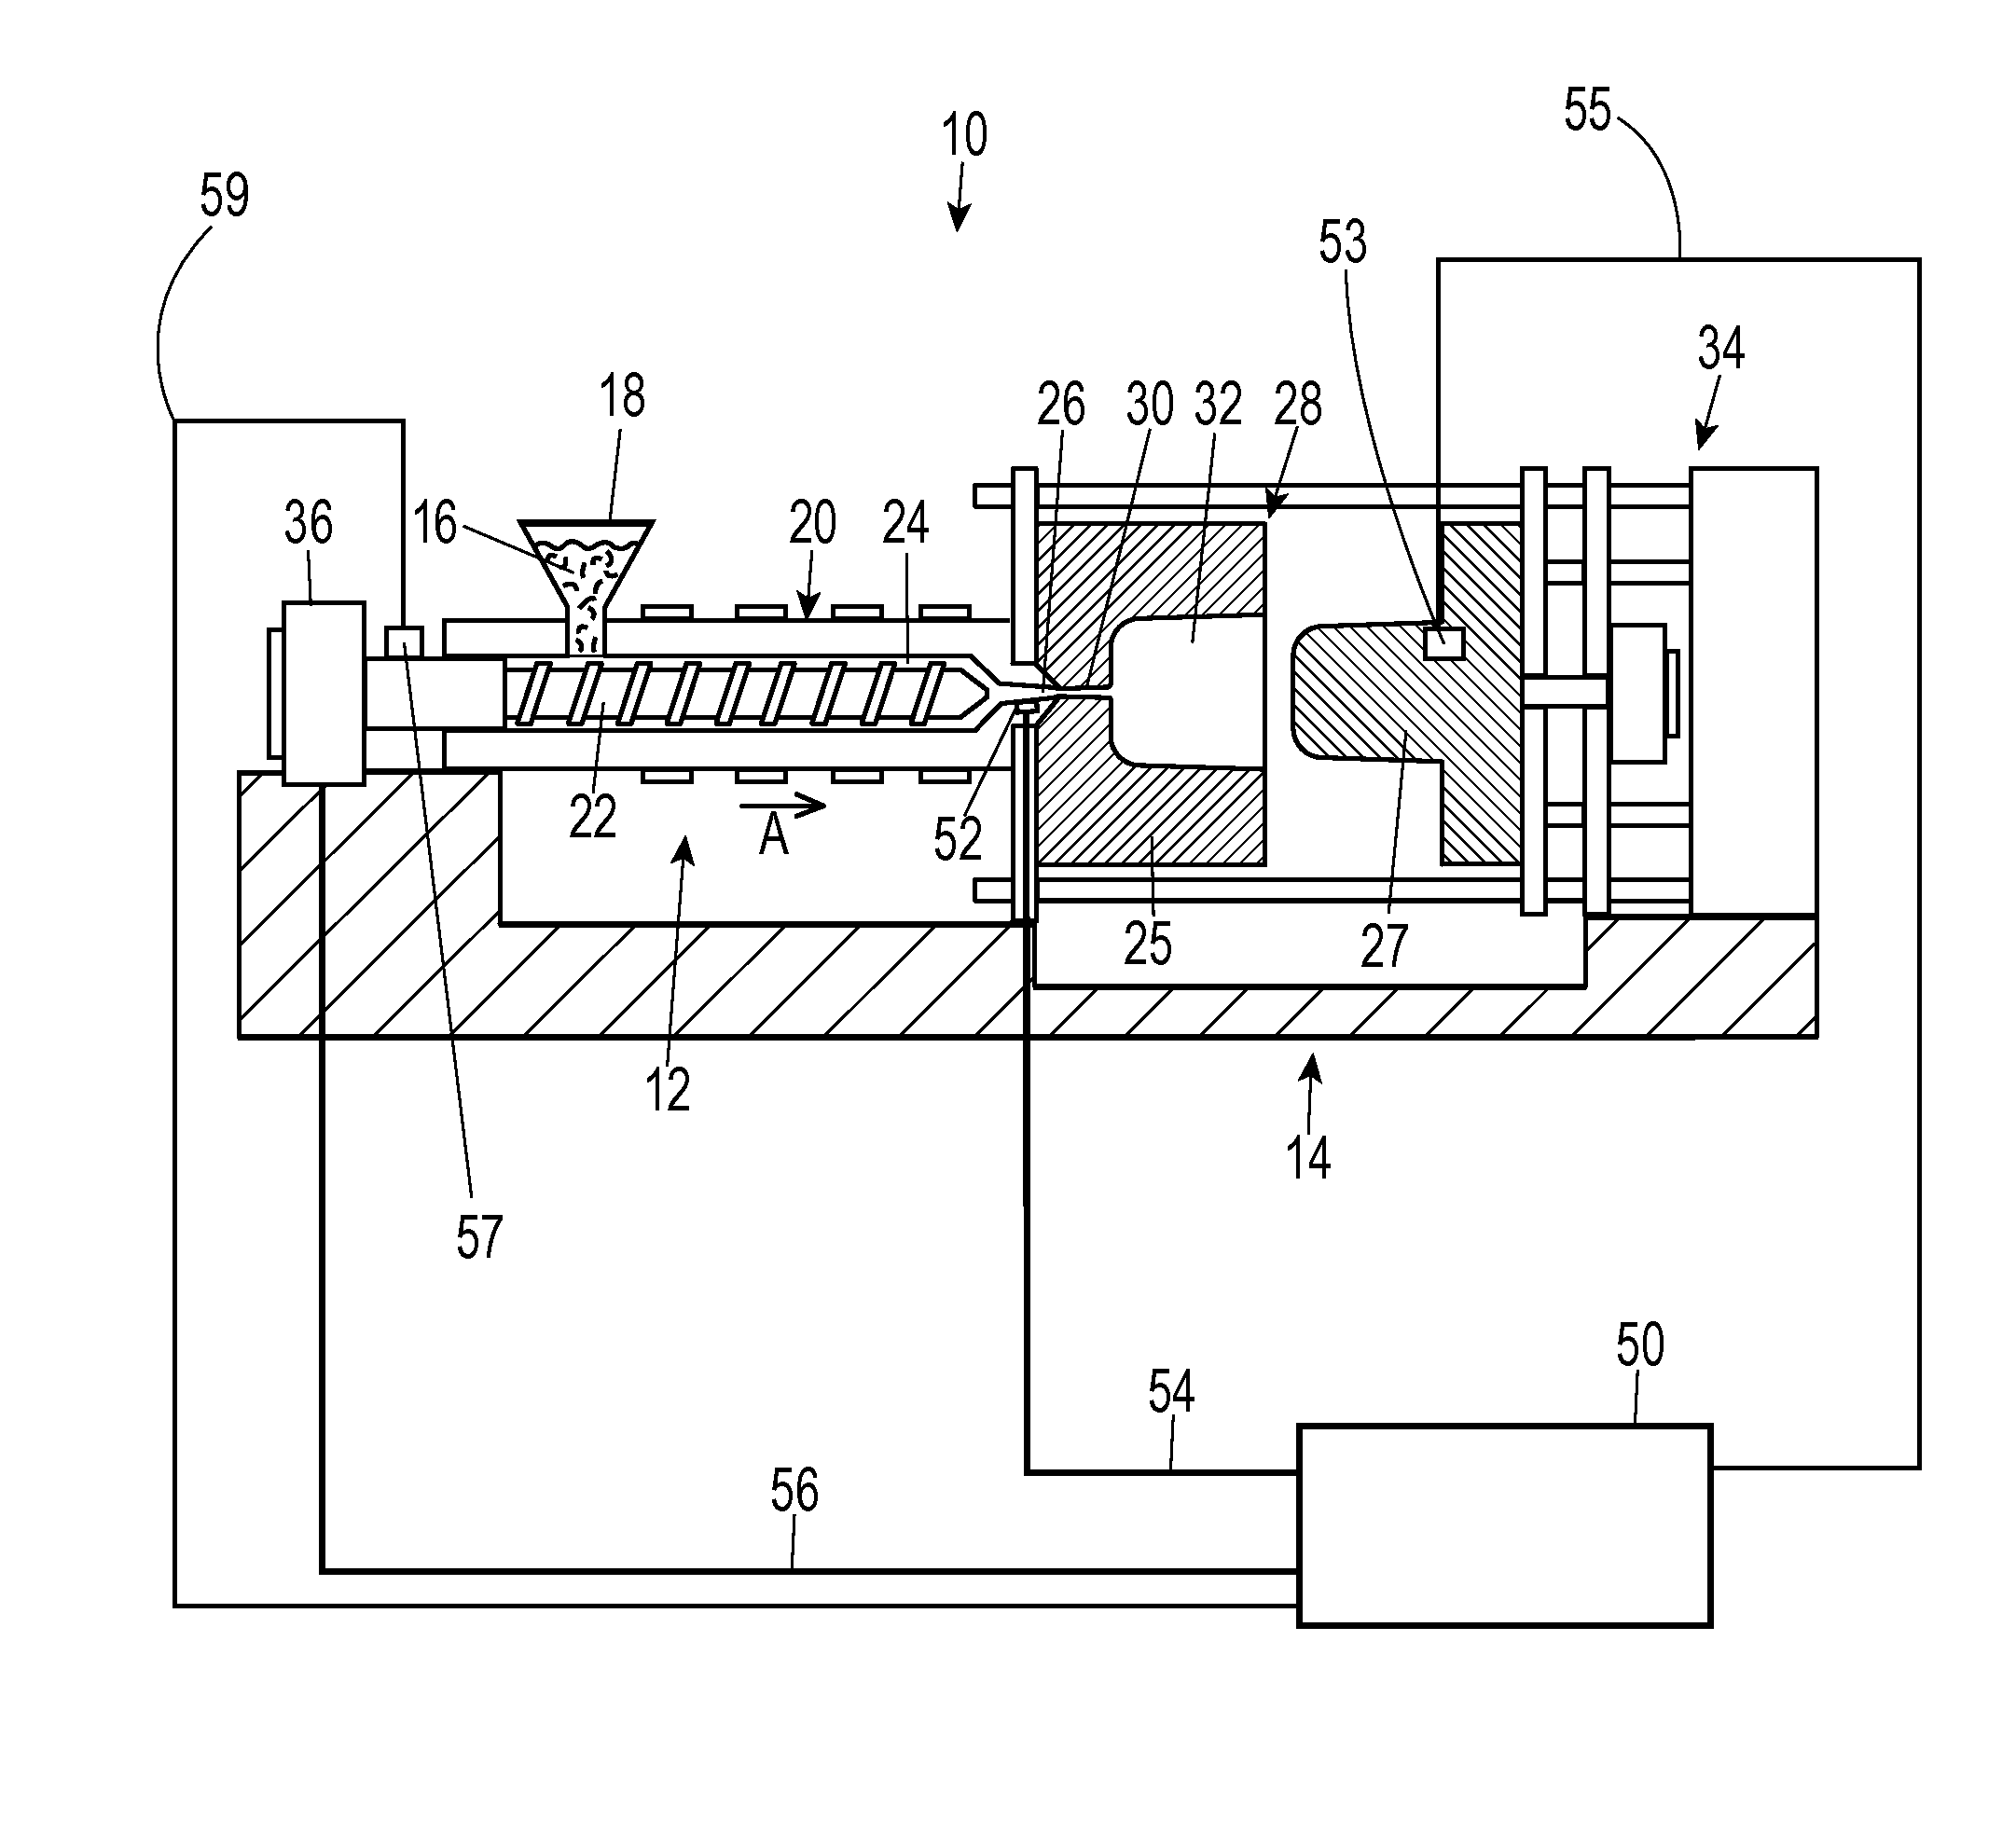 Injection Molding Machines and Methods for Accounting for Changes in Material Properties During Injection Molding Runs